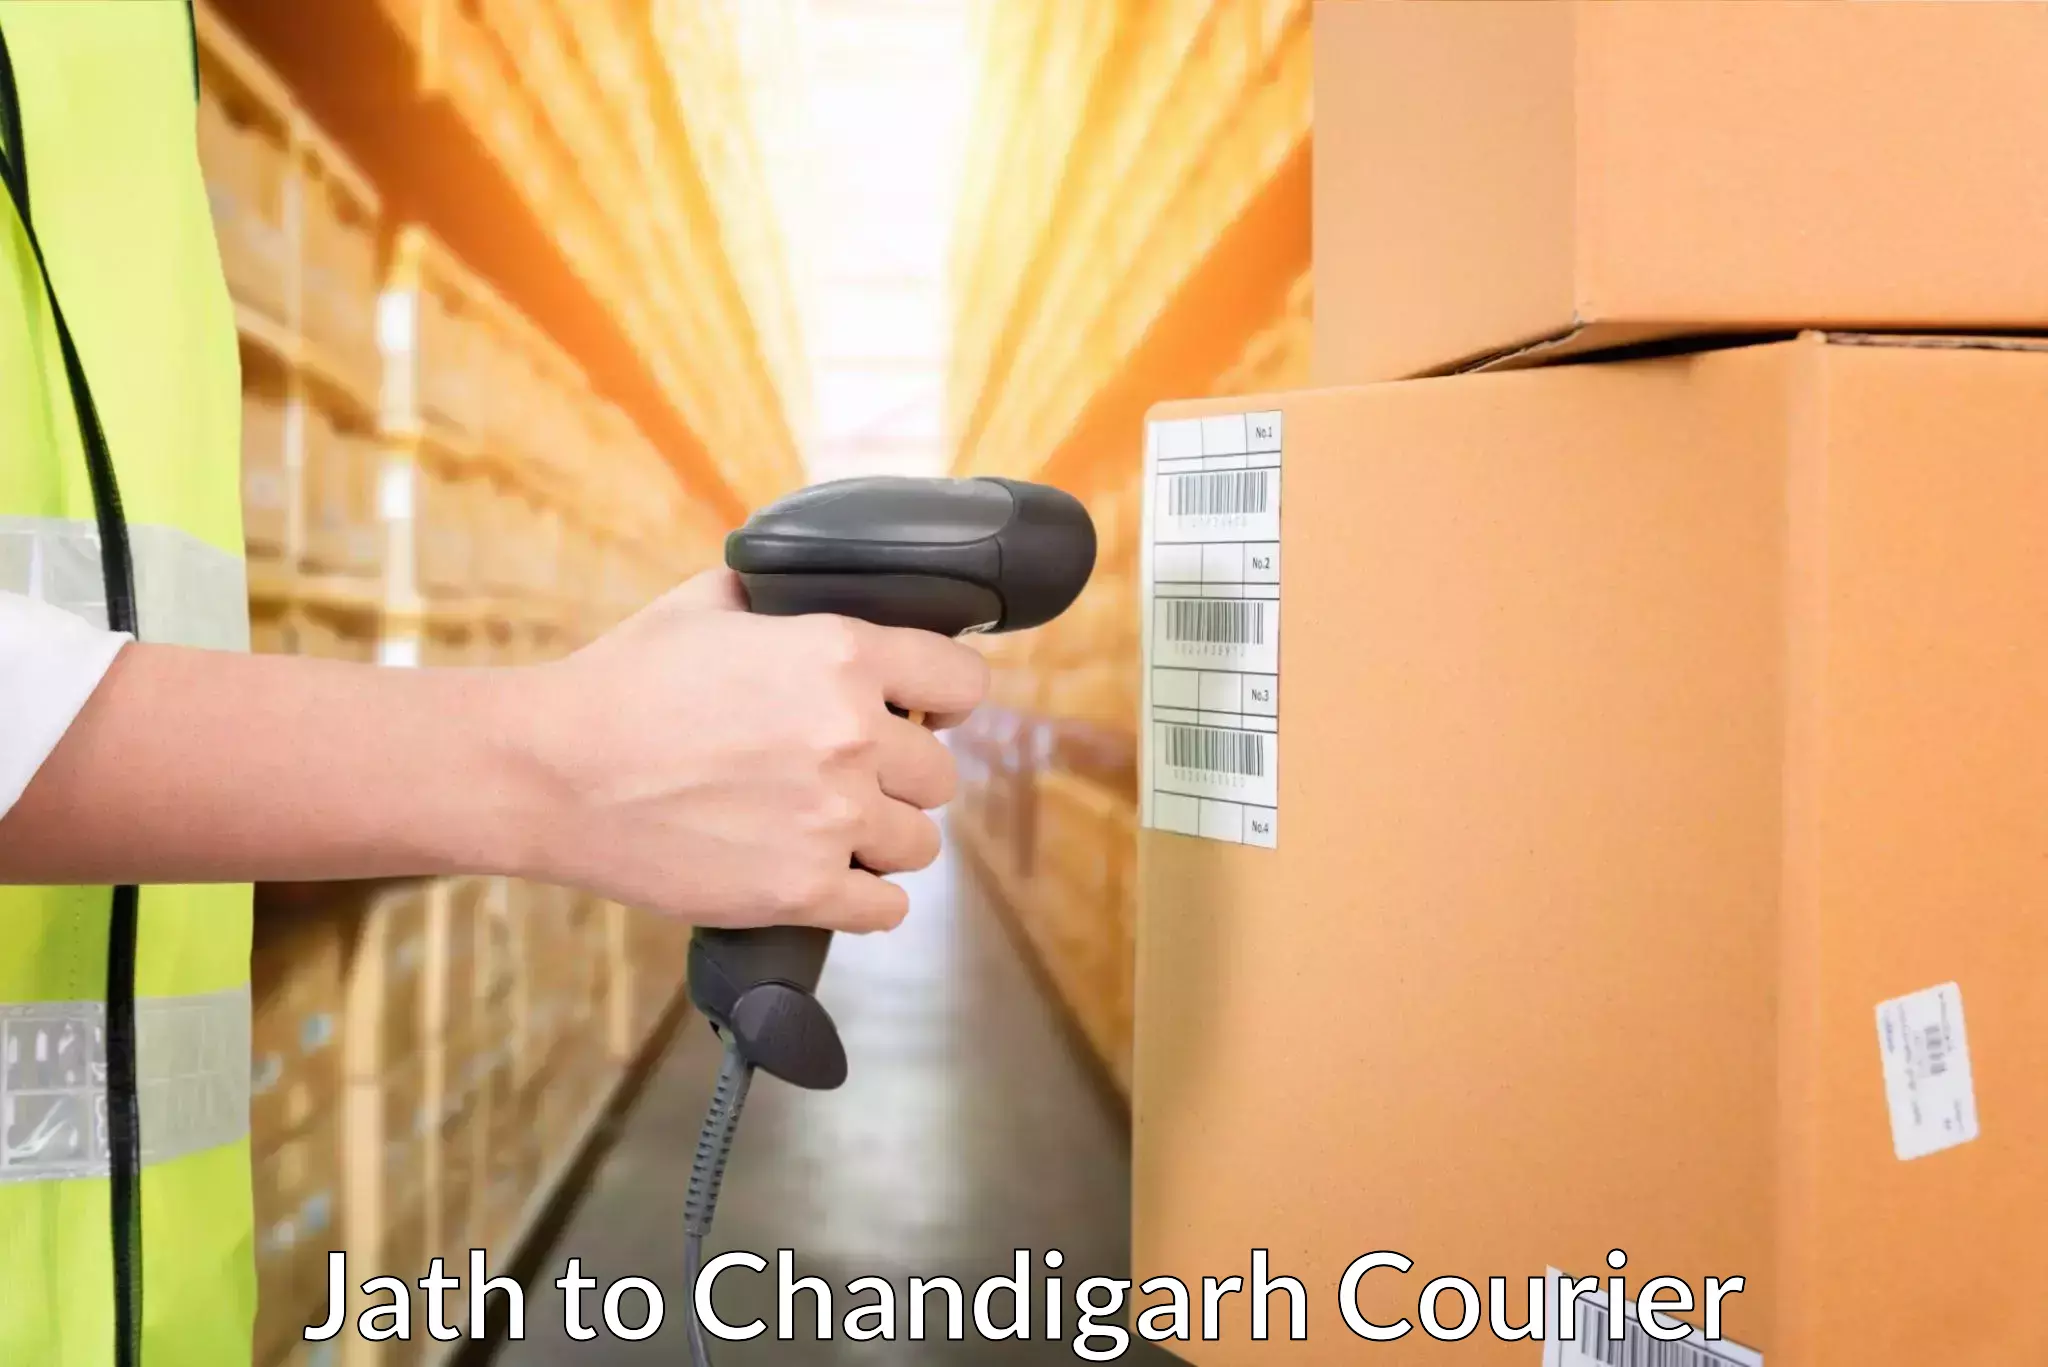 State-of-the-art courier technology Jath to Panjab University Chandigarh